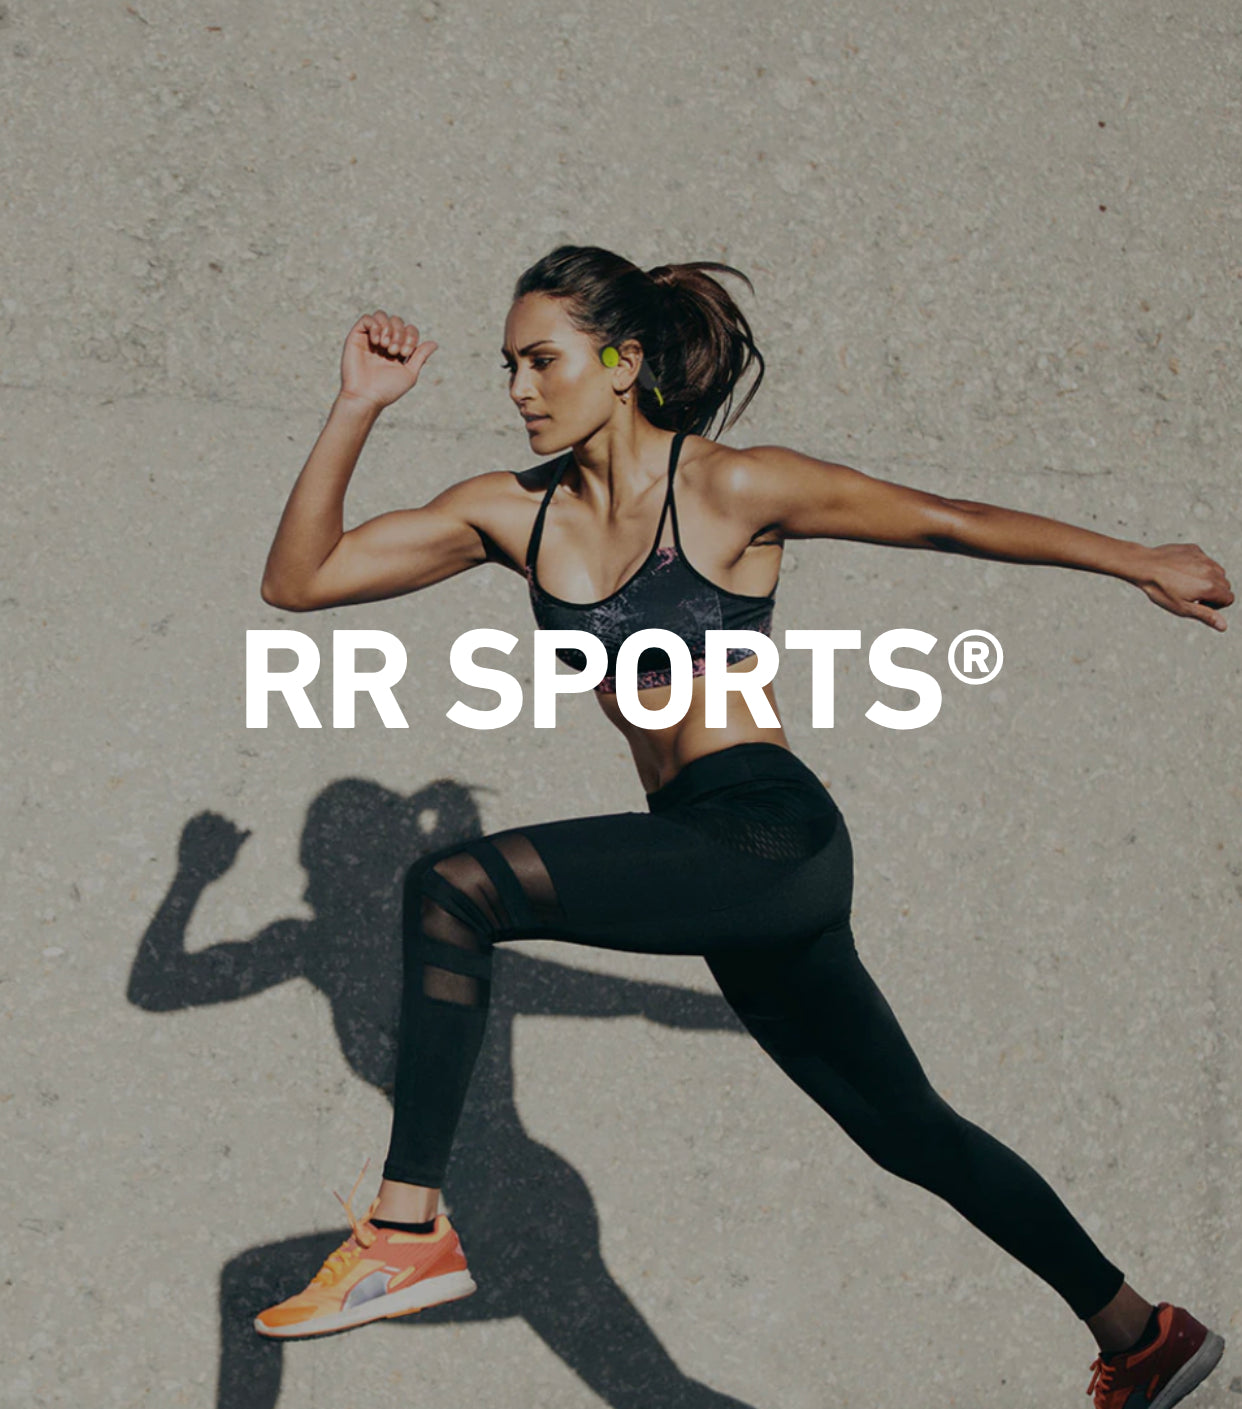 Discover the Innovative World of RR SPORTS® Bone Conduction Headphones